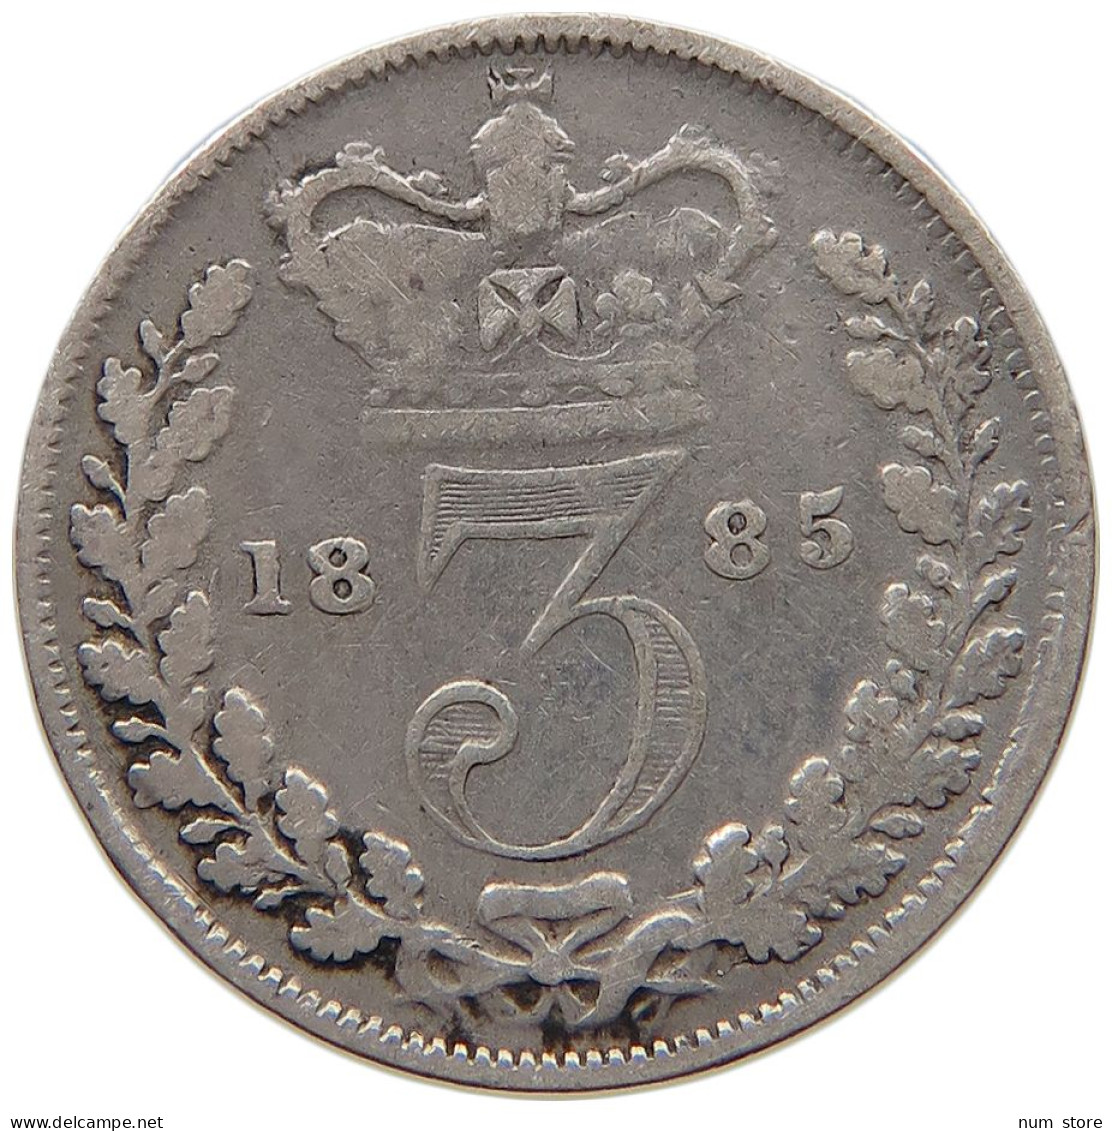 GREAT BRITAIN THREEPENCE 1885 Victoria 1837-1901 #c052 0273 - F. 3 Pence